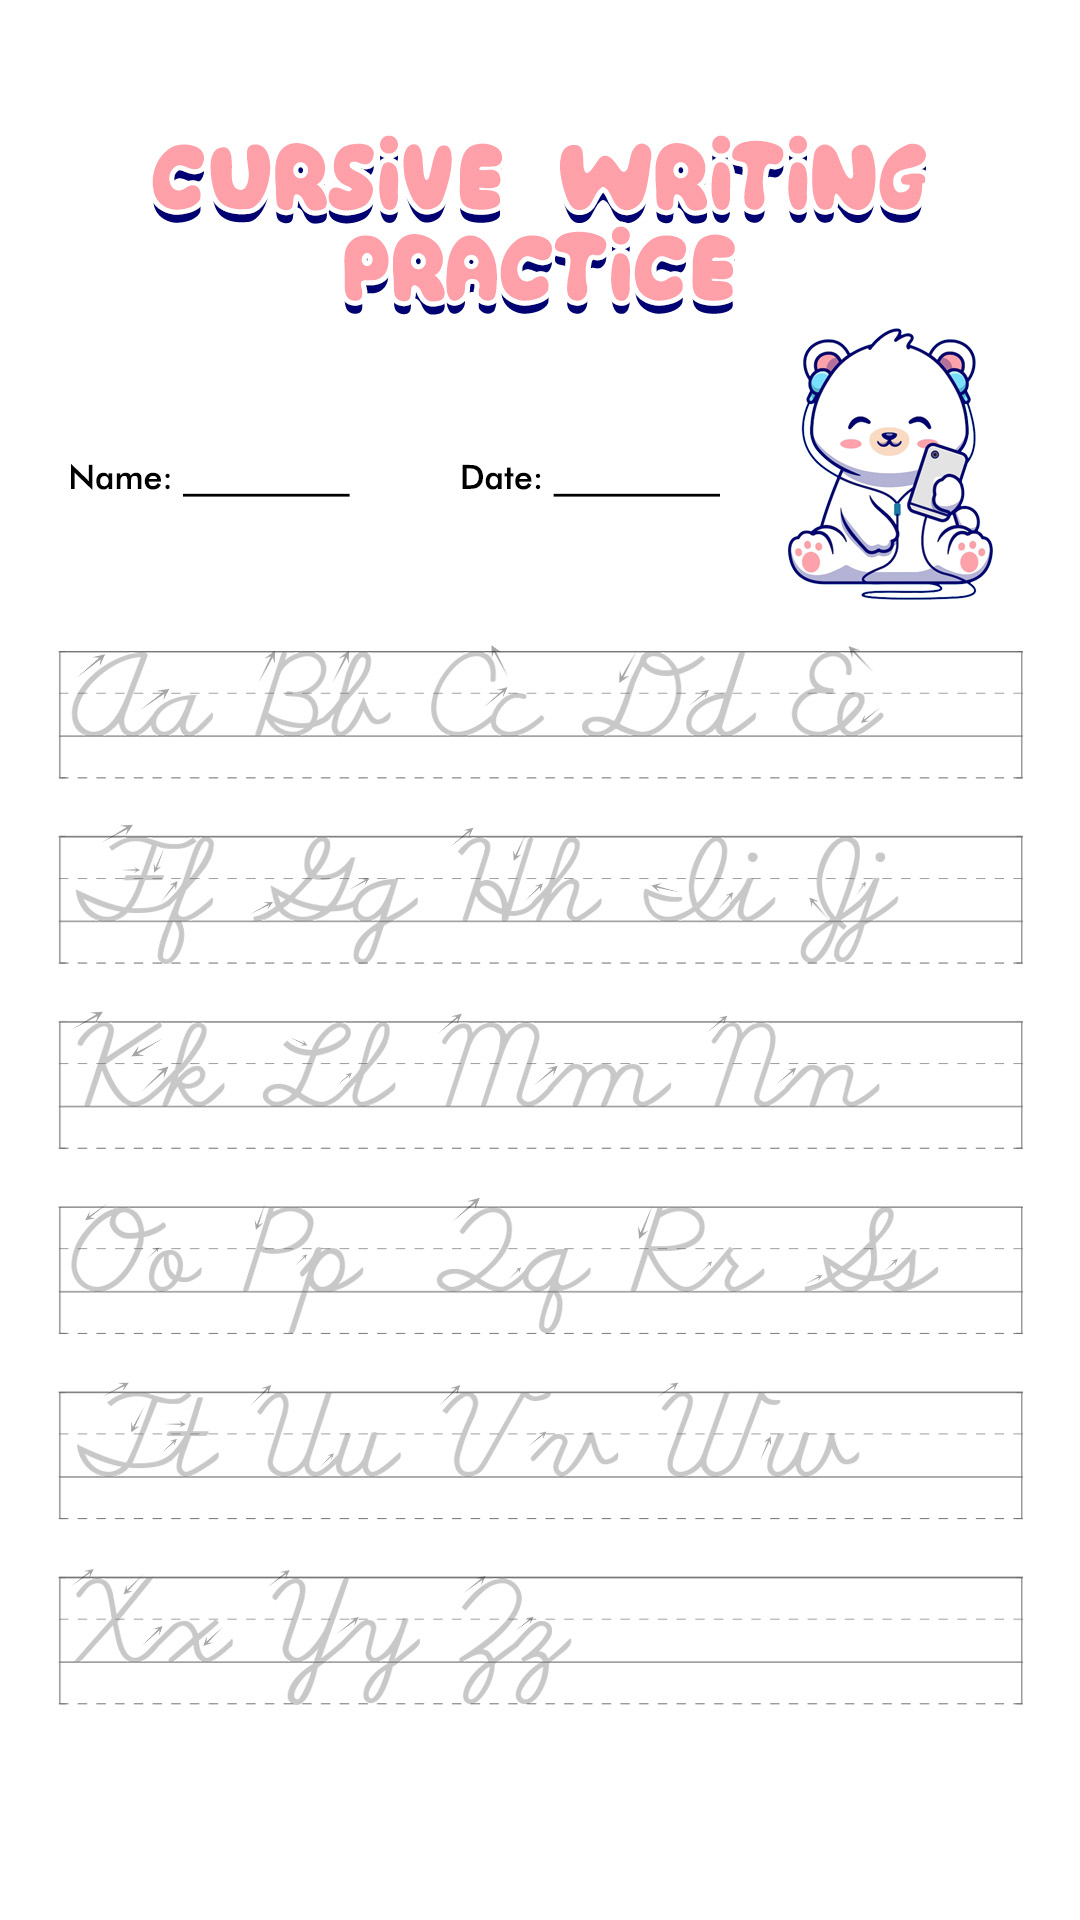 Empty Cursive Practice Page / Everything You Need to Learn Cursive